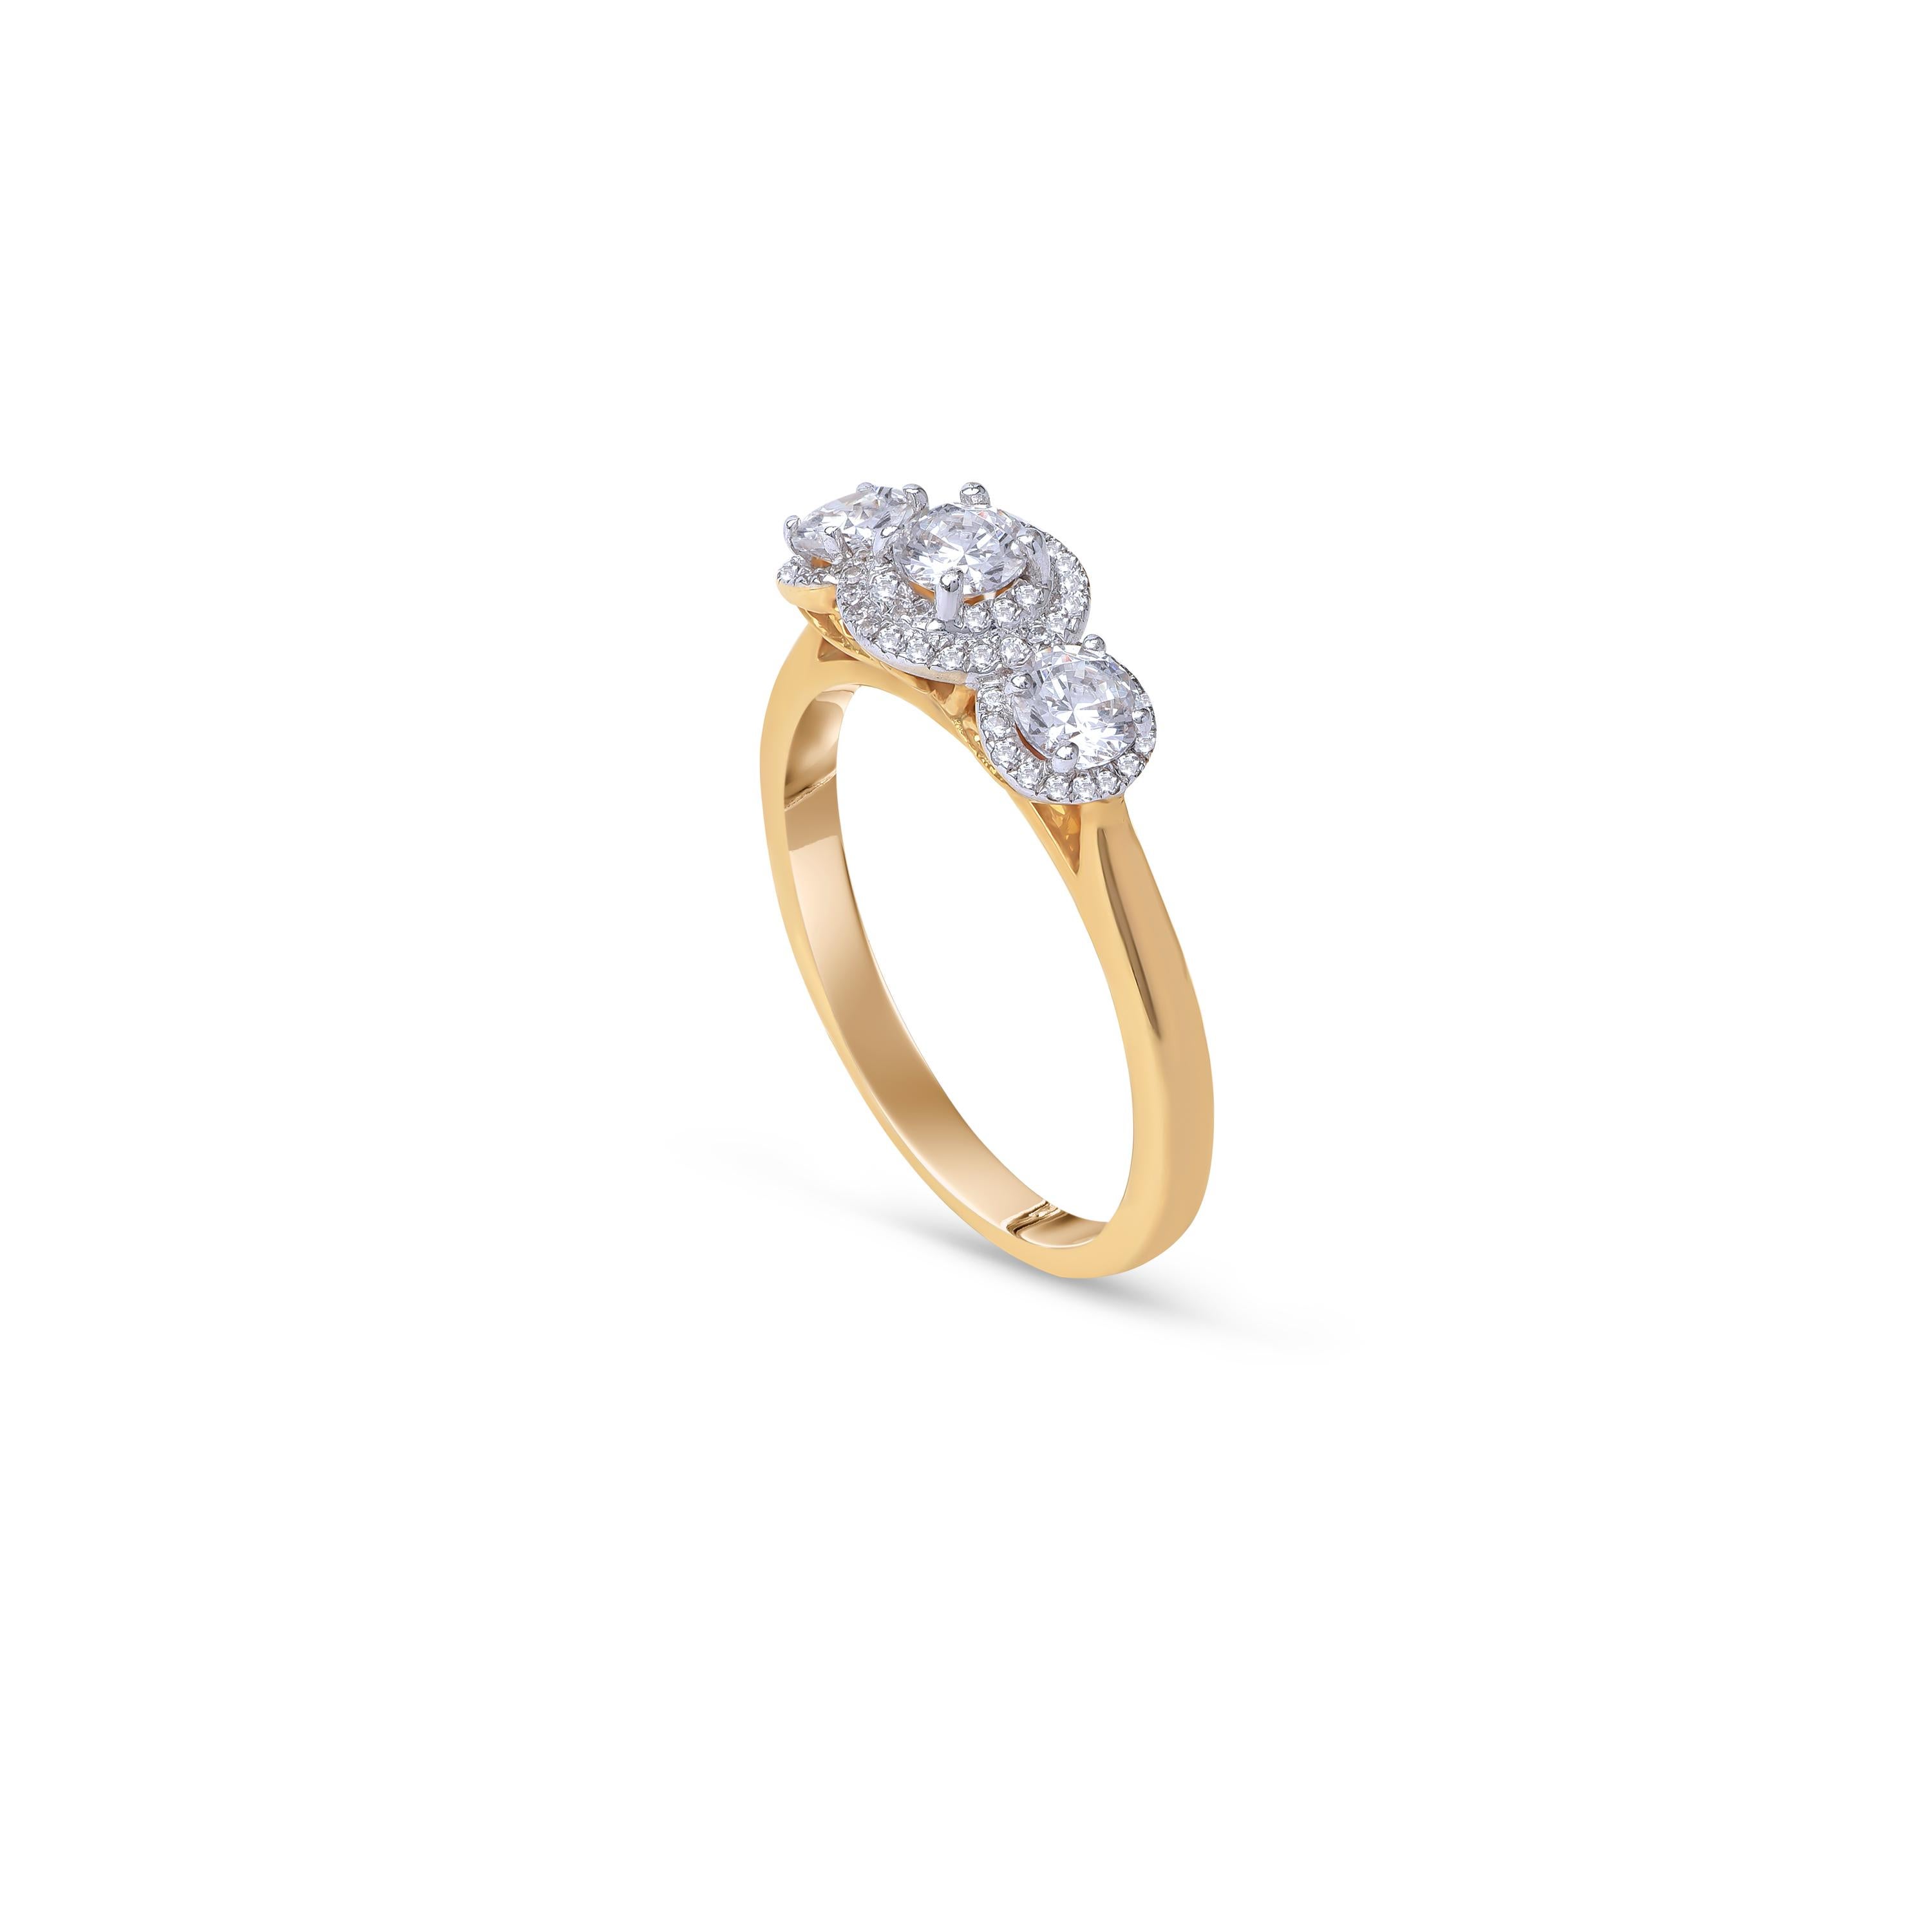 This gorgeous ring shines bright with 63 brilliant diamonds set elegantly in prong and micro-prong setting and fashioned in 18 kt yellow gold. Diamonds are graded H-I Color, I1 Clarity. 

Metal color and ring size can be customized on request.